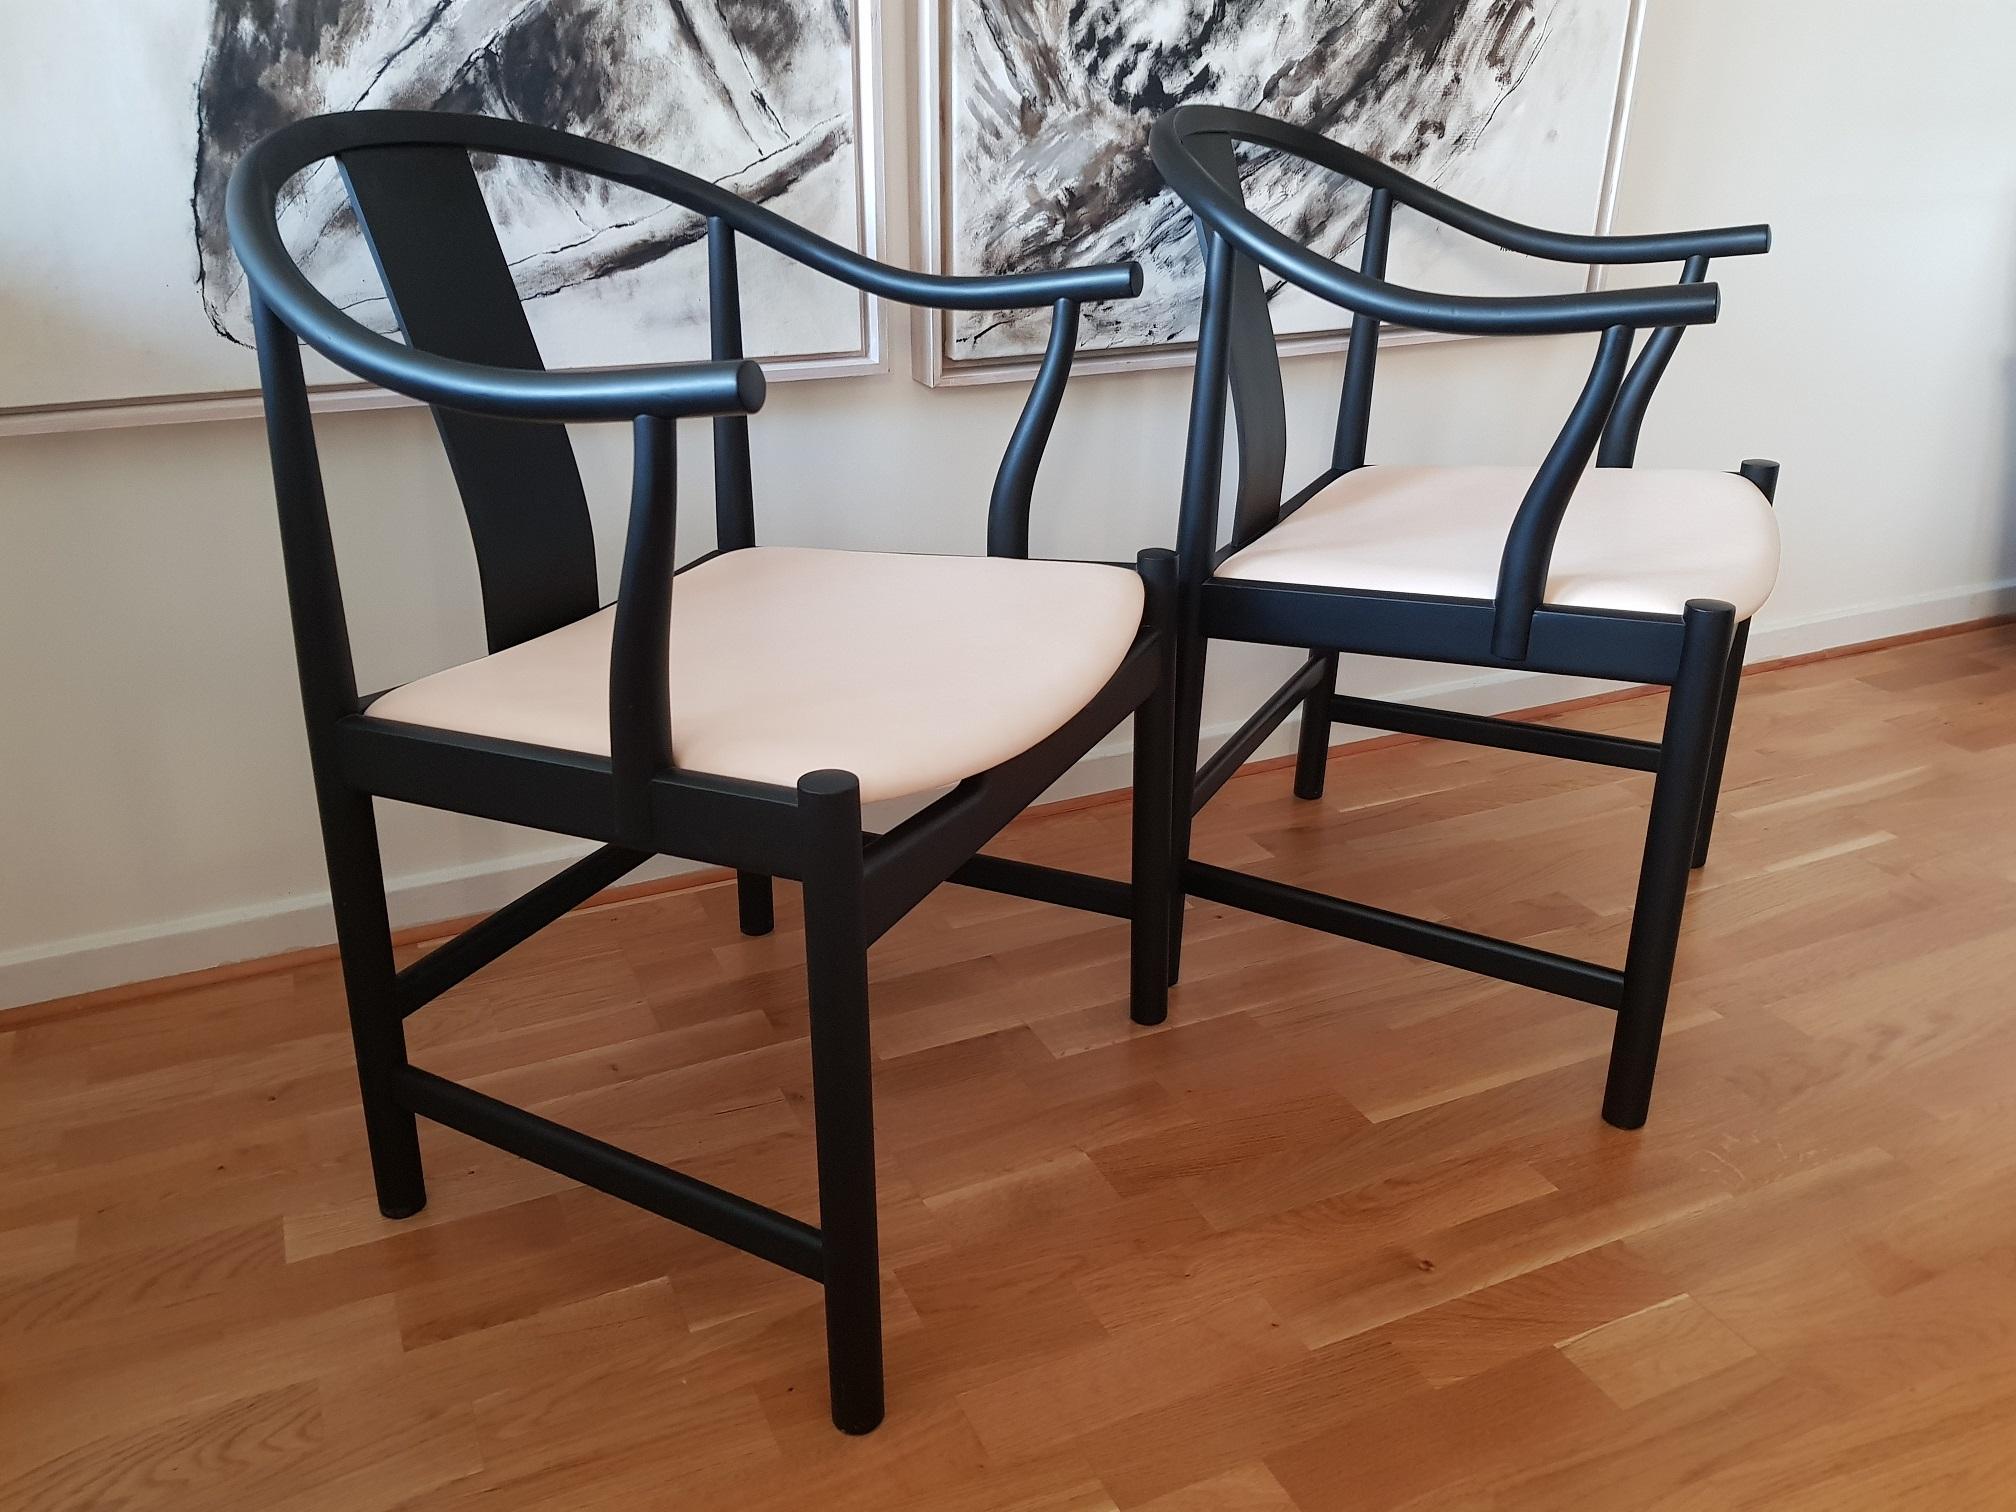 2 China chairs in matt black oak and high quality natural leather. Professionally repainted in cool matt black by the former owner who wanted a personal touch and a set of chairs that nobody else had. Newly upholstered seats in soft natural leather.